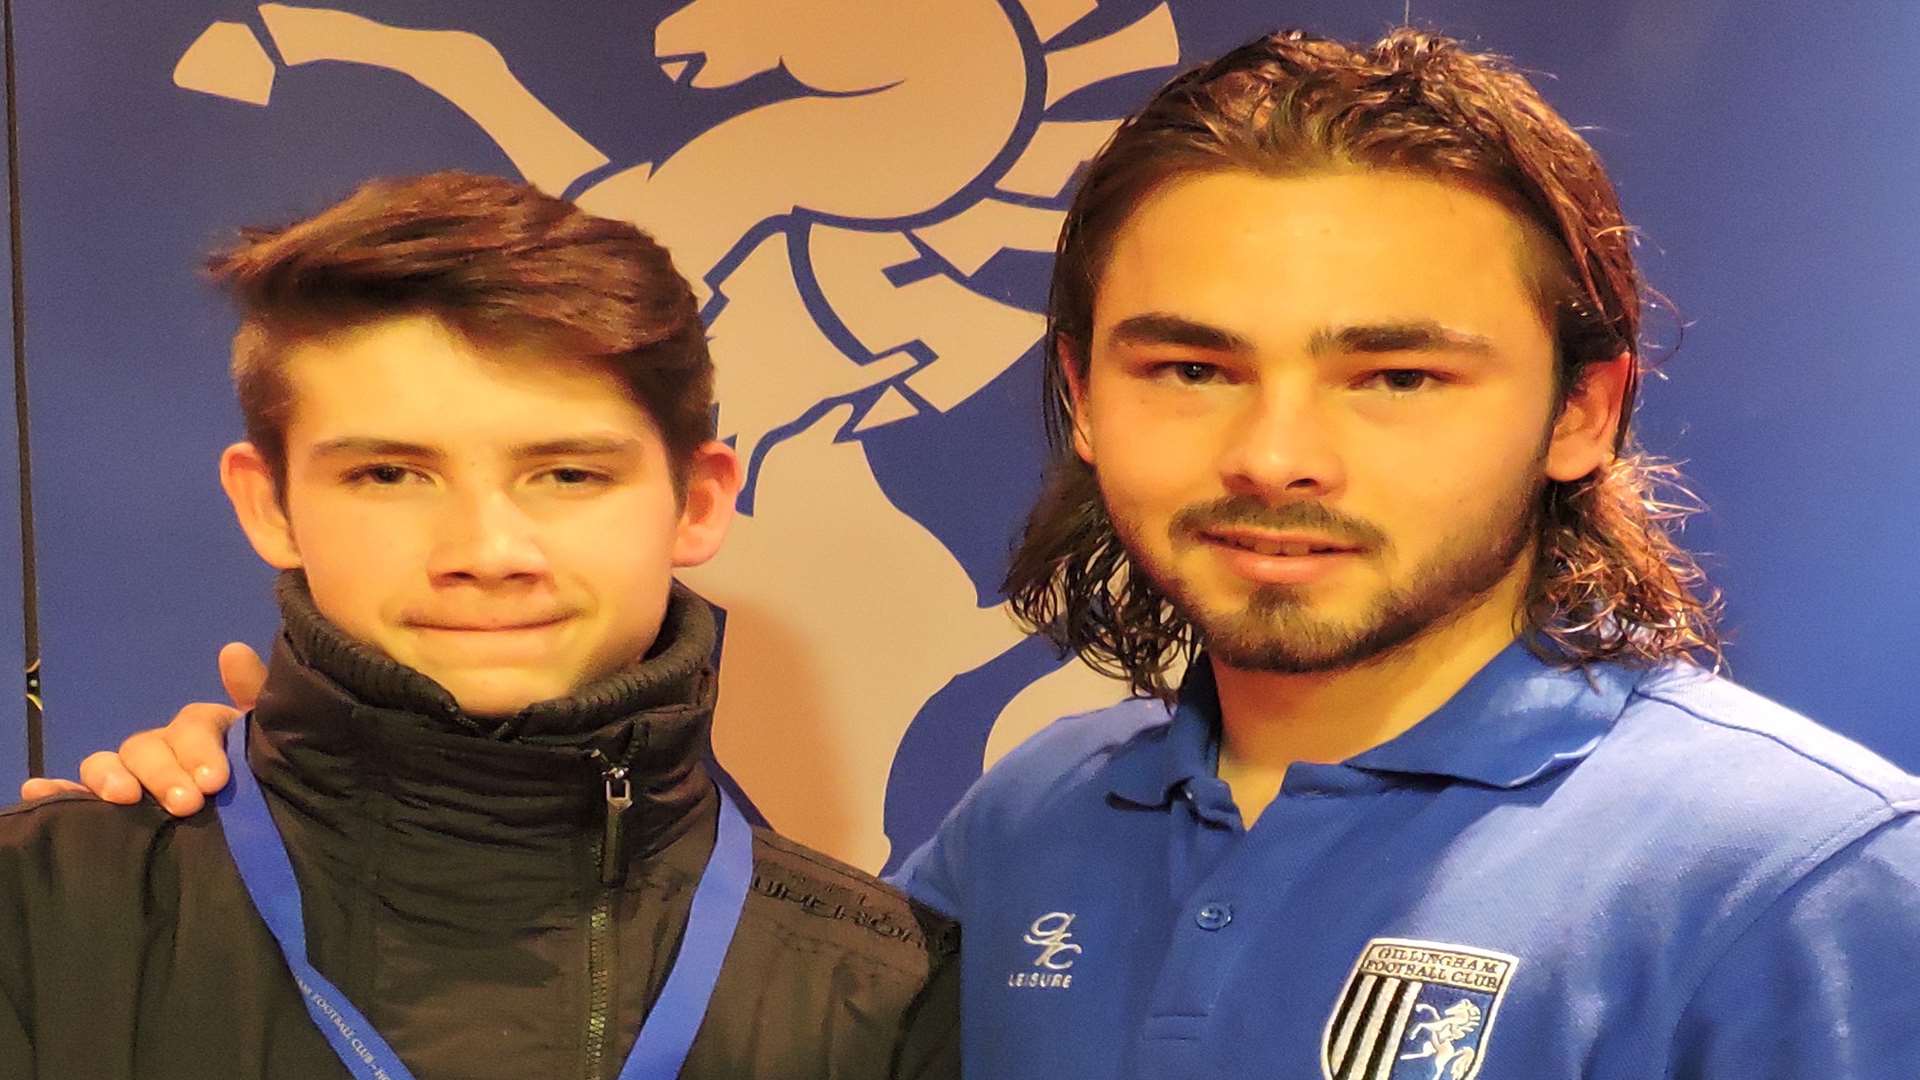 Charlie Nash was Gillingham's 12th man, pictured with Bradley Dack